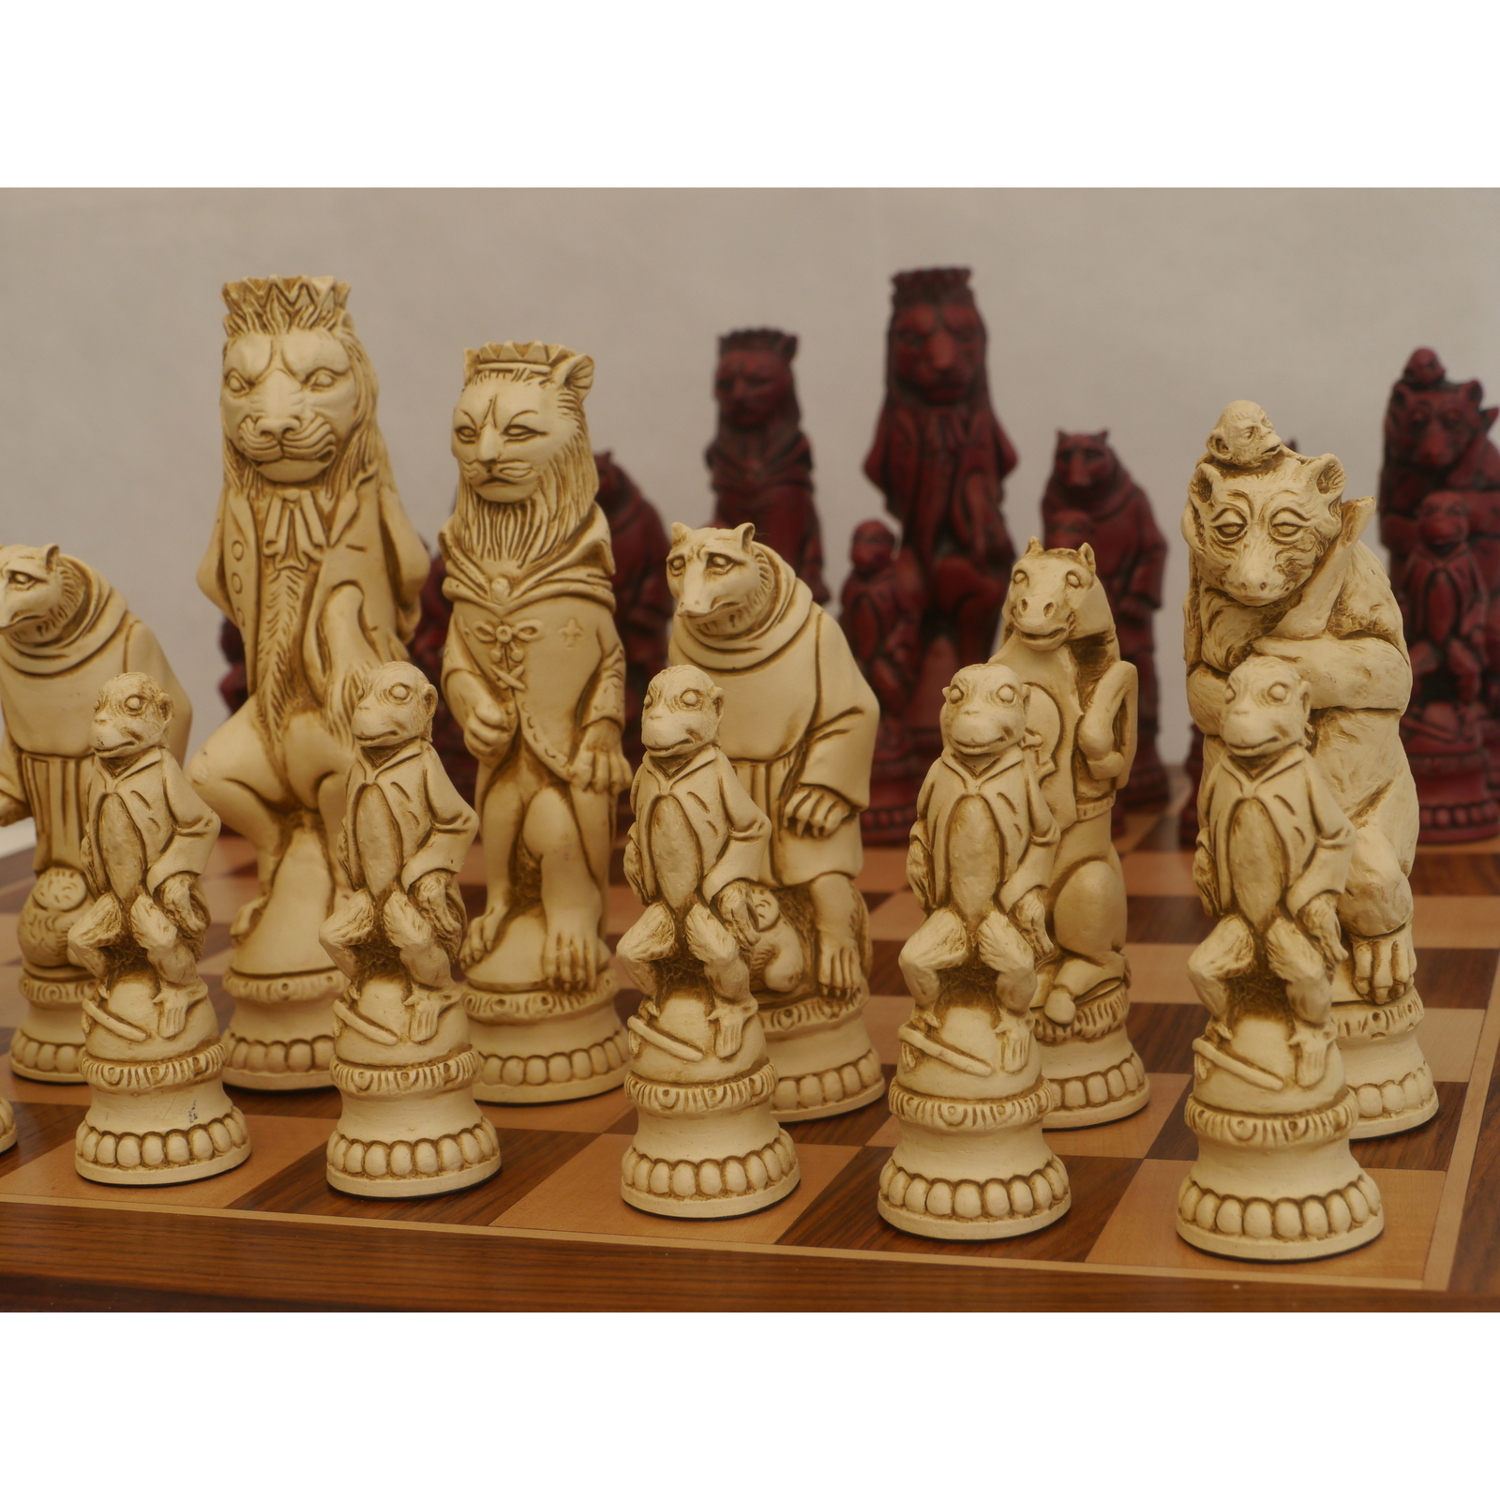 Chess Pieces, Blooket Wiki